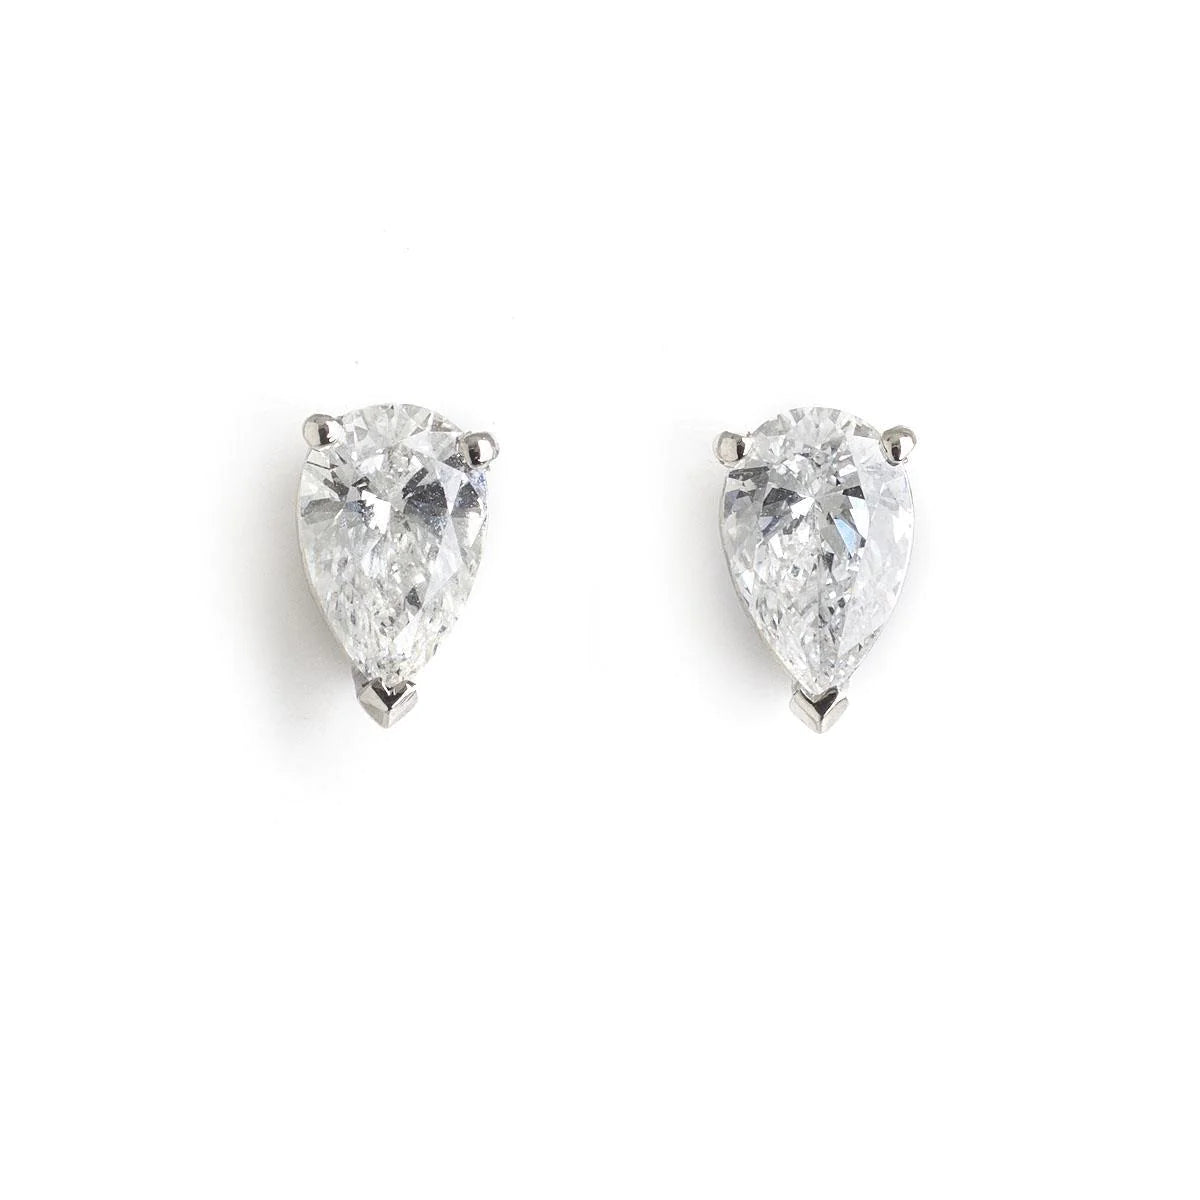 2.50 Carats Pear Cut Sparkling Genuine Diamonds Studs Earrings White Gold